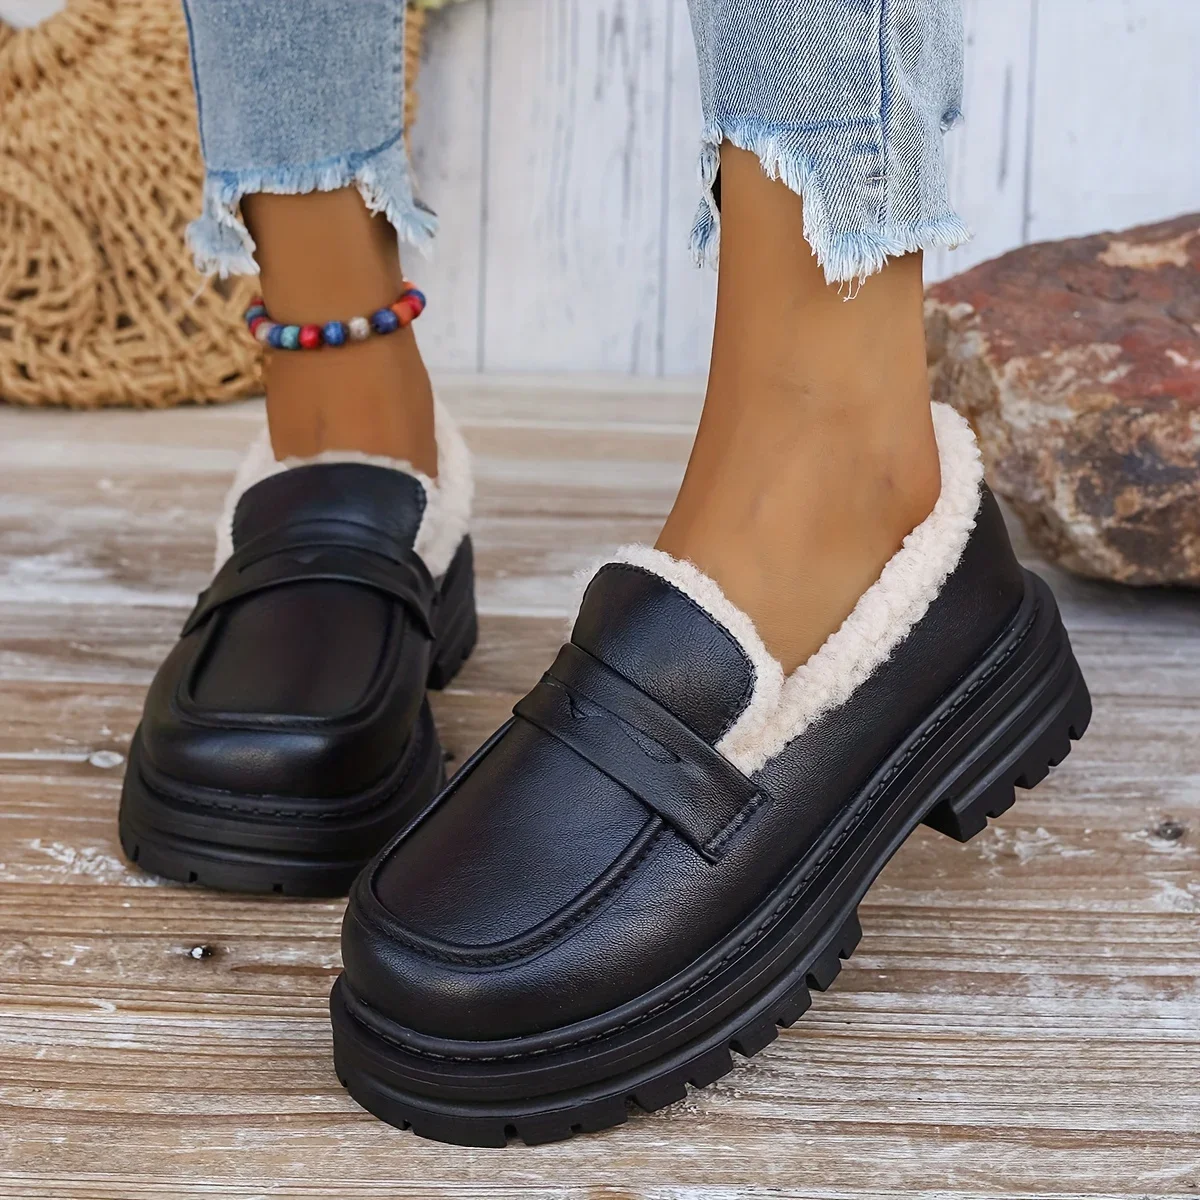 

Women Solid Color Fuzzy Loafers Soft Sole Comfy Platform Thermal Lined Shoes Winter Plush Warm Shoes